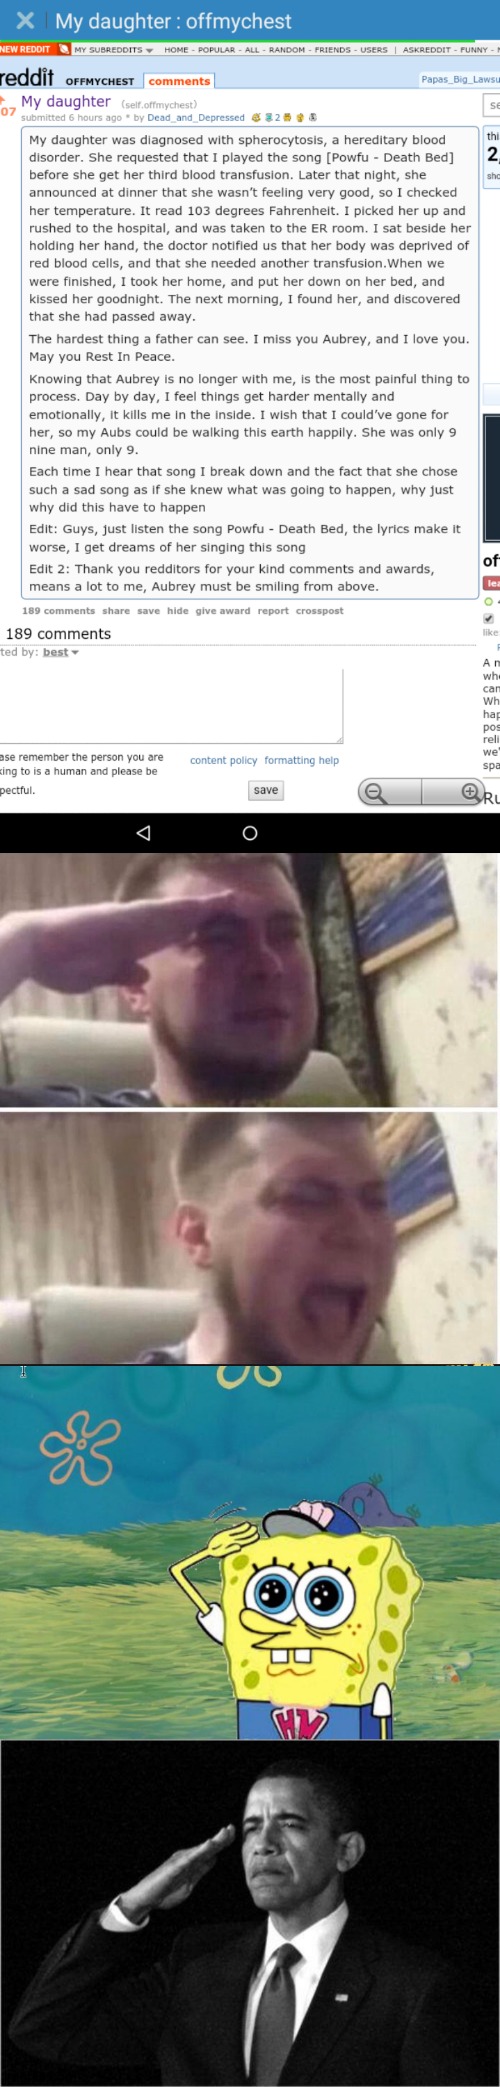 image tagged in obama-salute,spongebob salute,crying salute | made w/ Imgflip meme maker